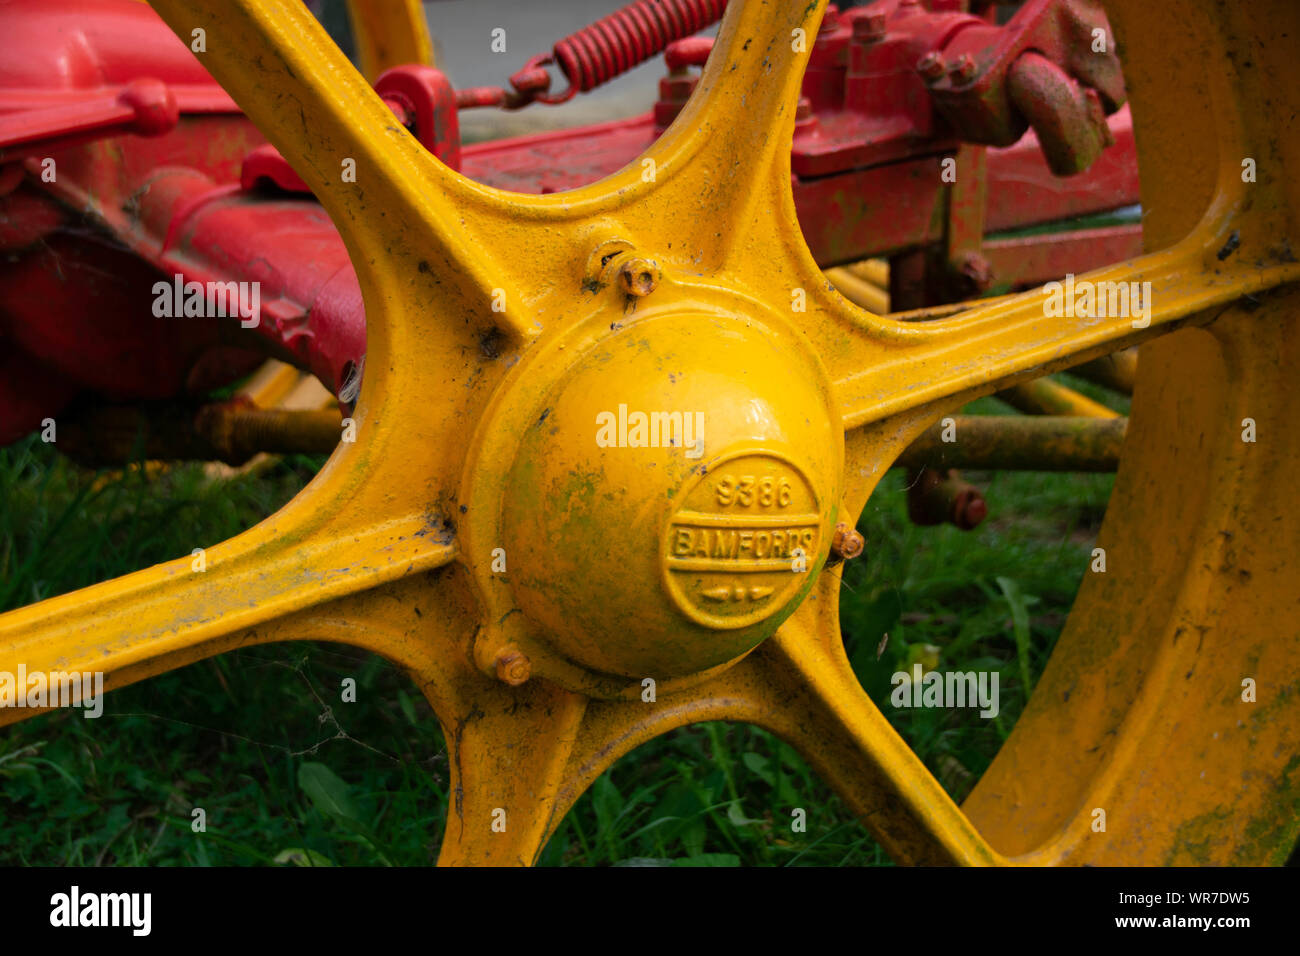 A bright yellow old fashioned tractor wheel Stock Photo